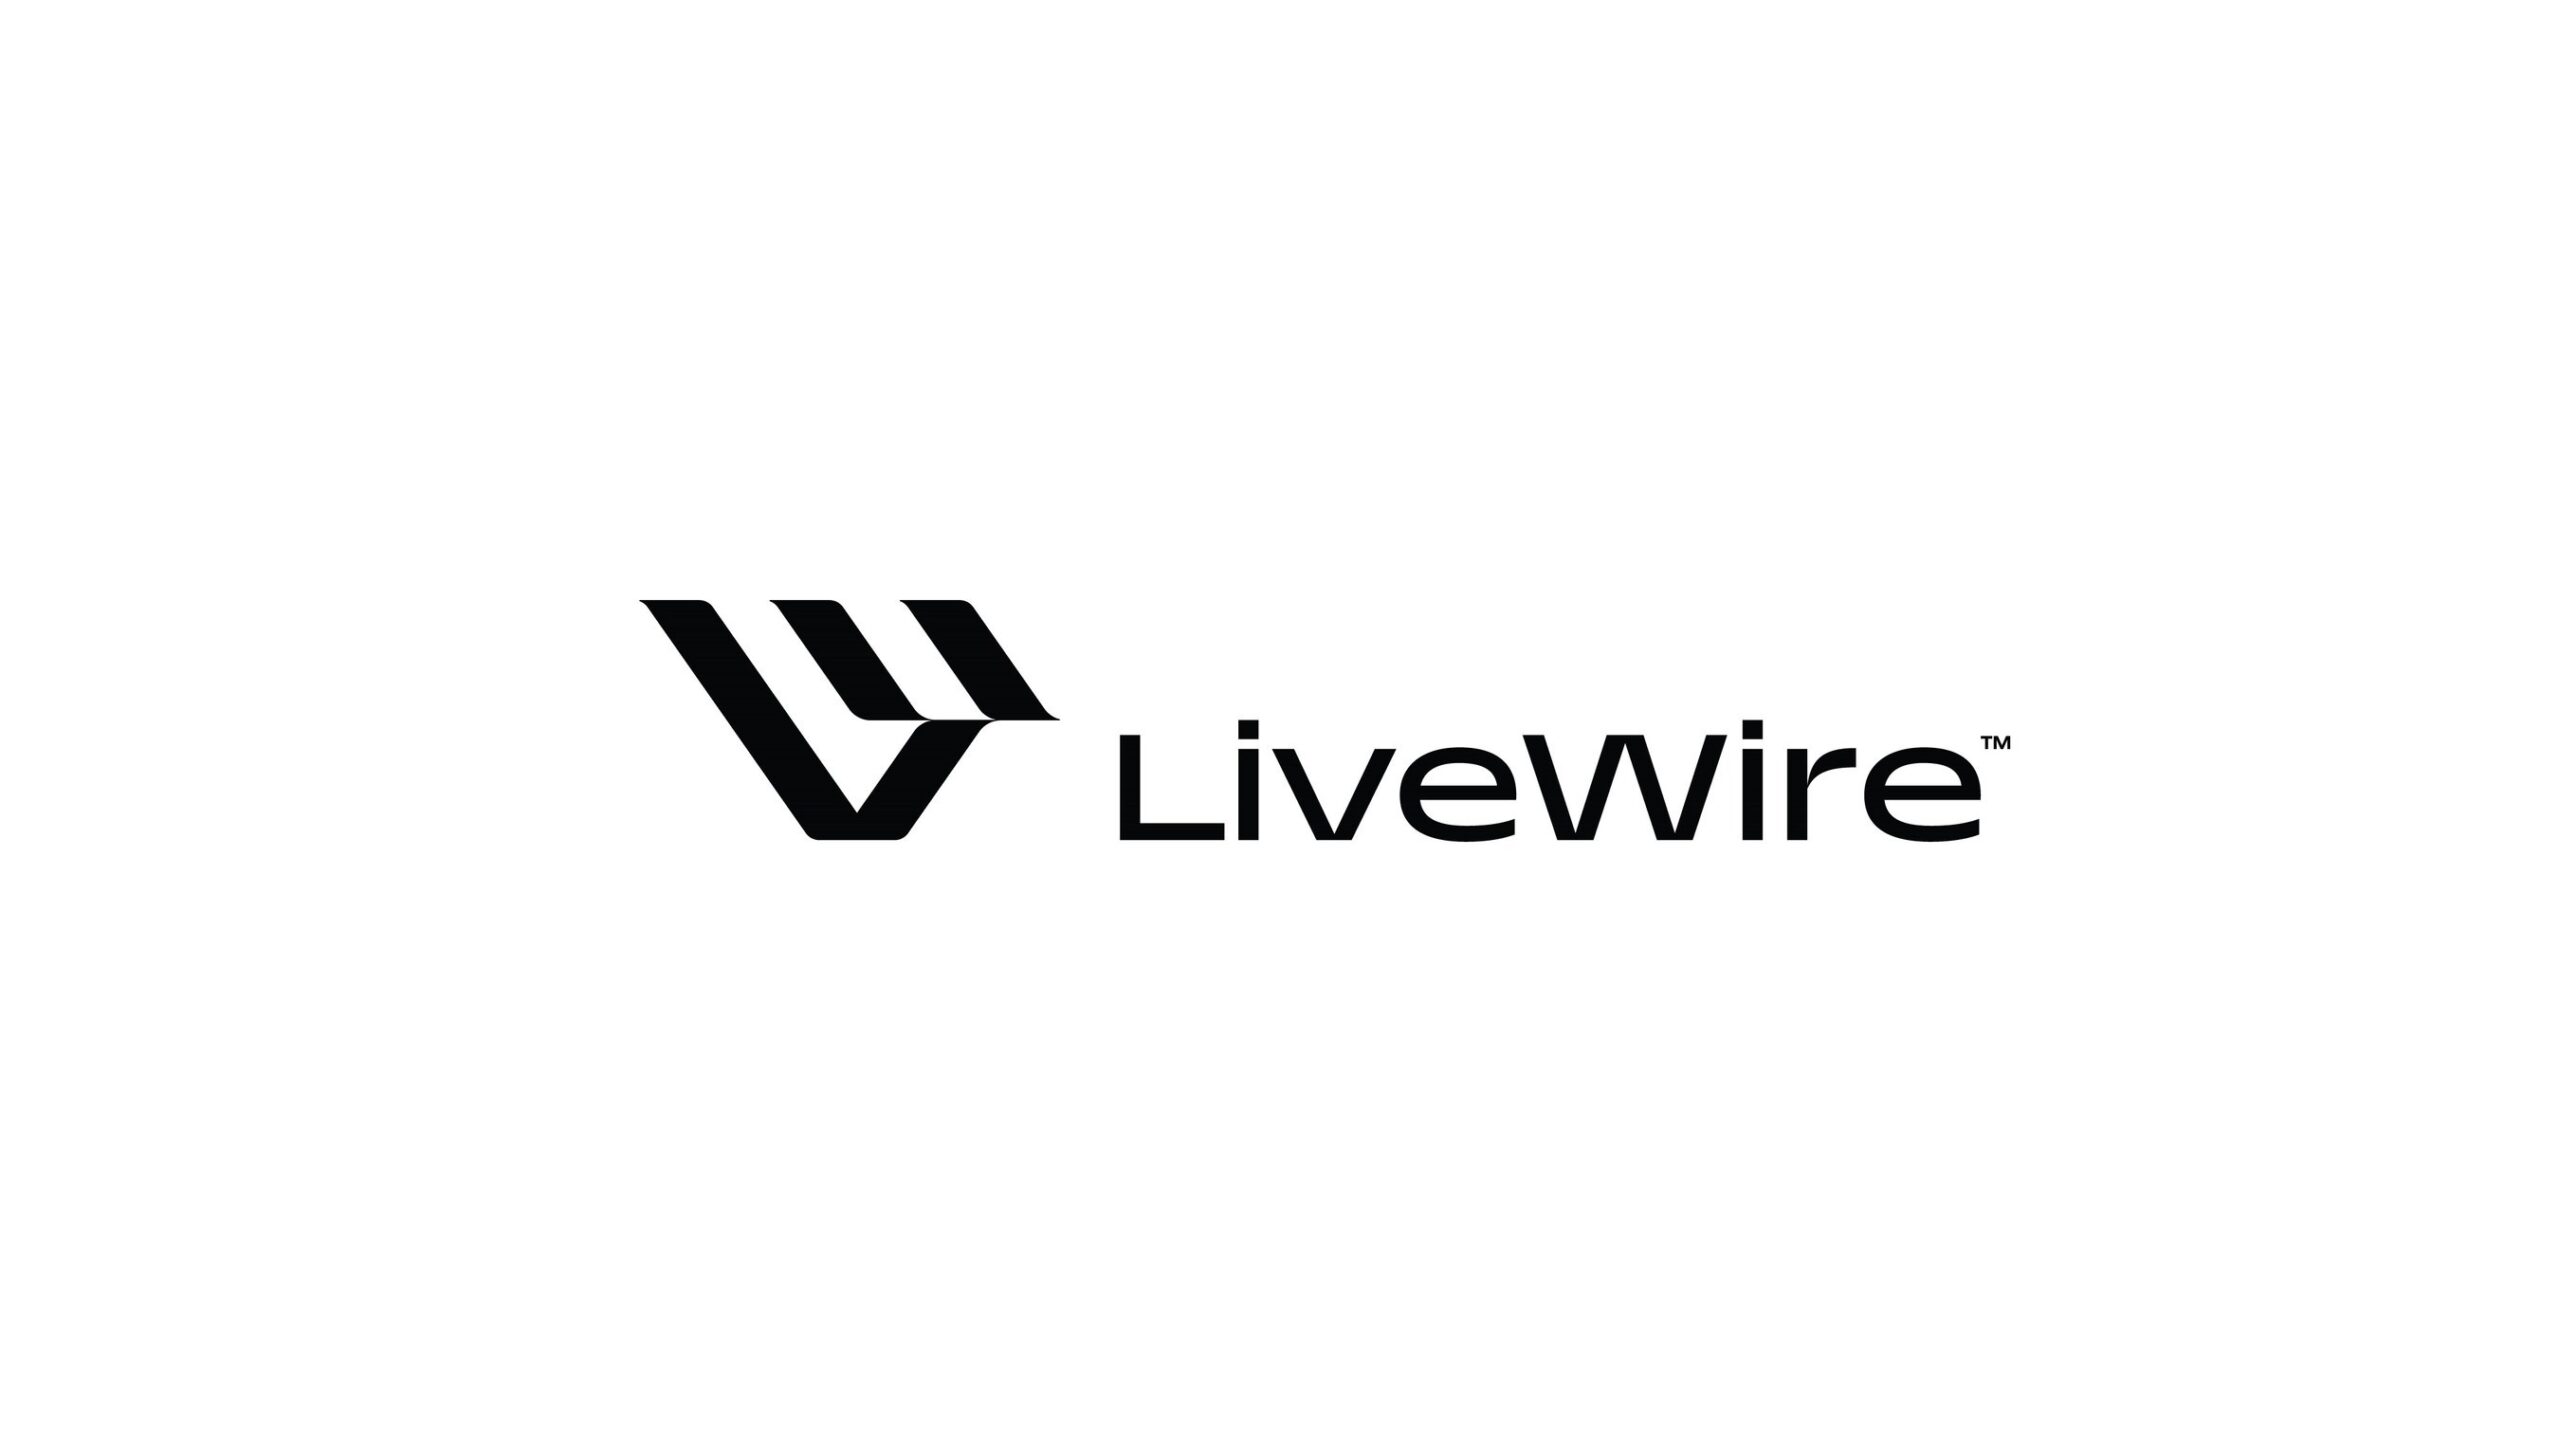 Introducing LiveWire ONE™, the first product from the all-electric LiveWire™ brand